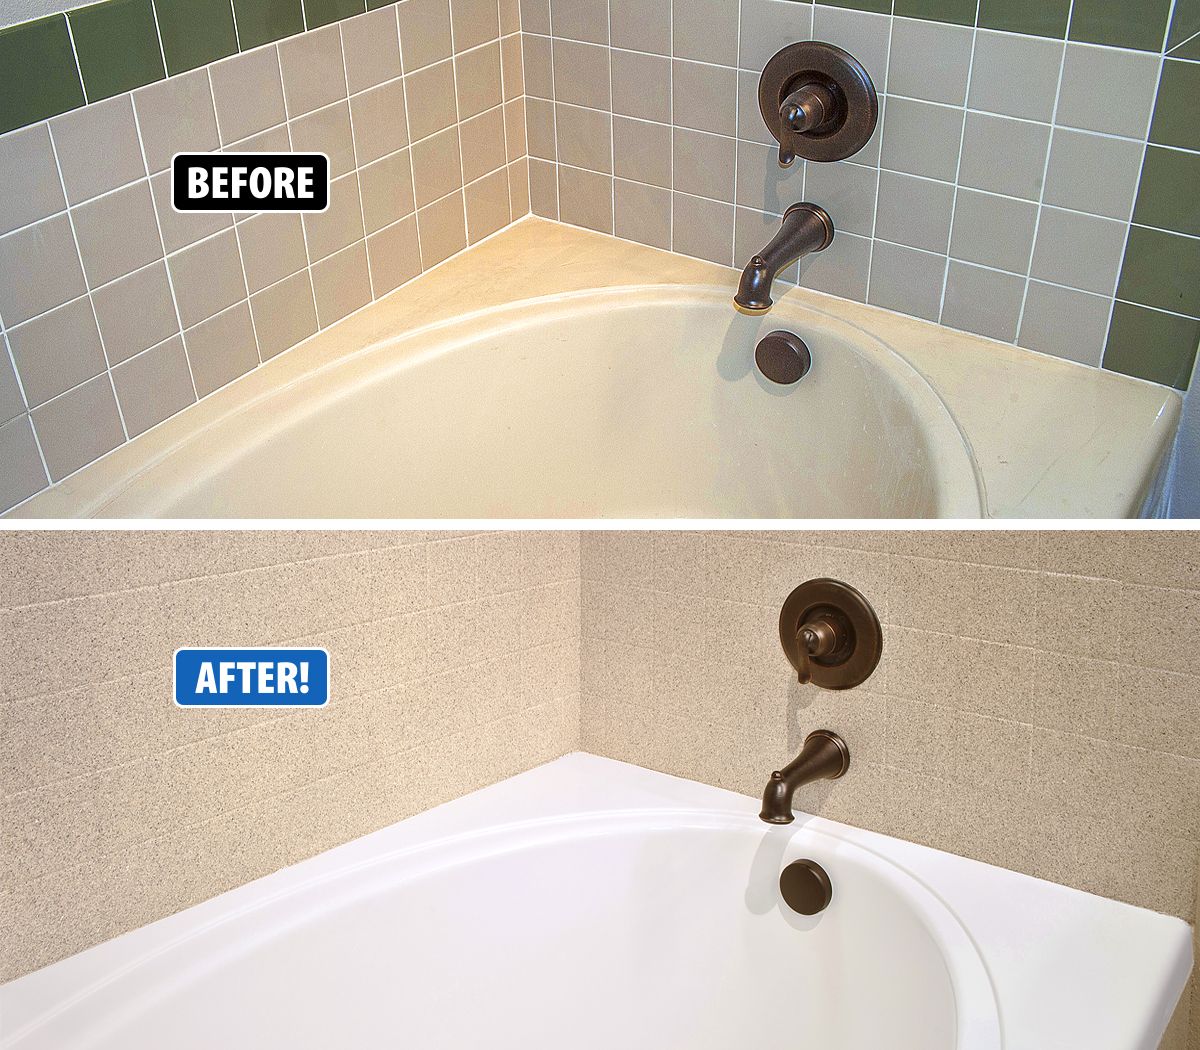 About Bathtub Refinishing, Can Bathtubs Be Resurfaced